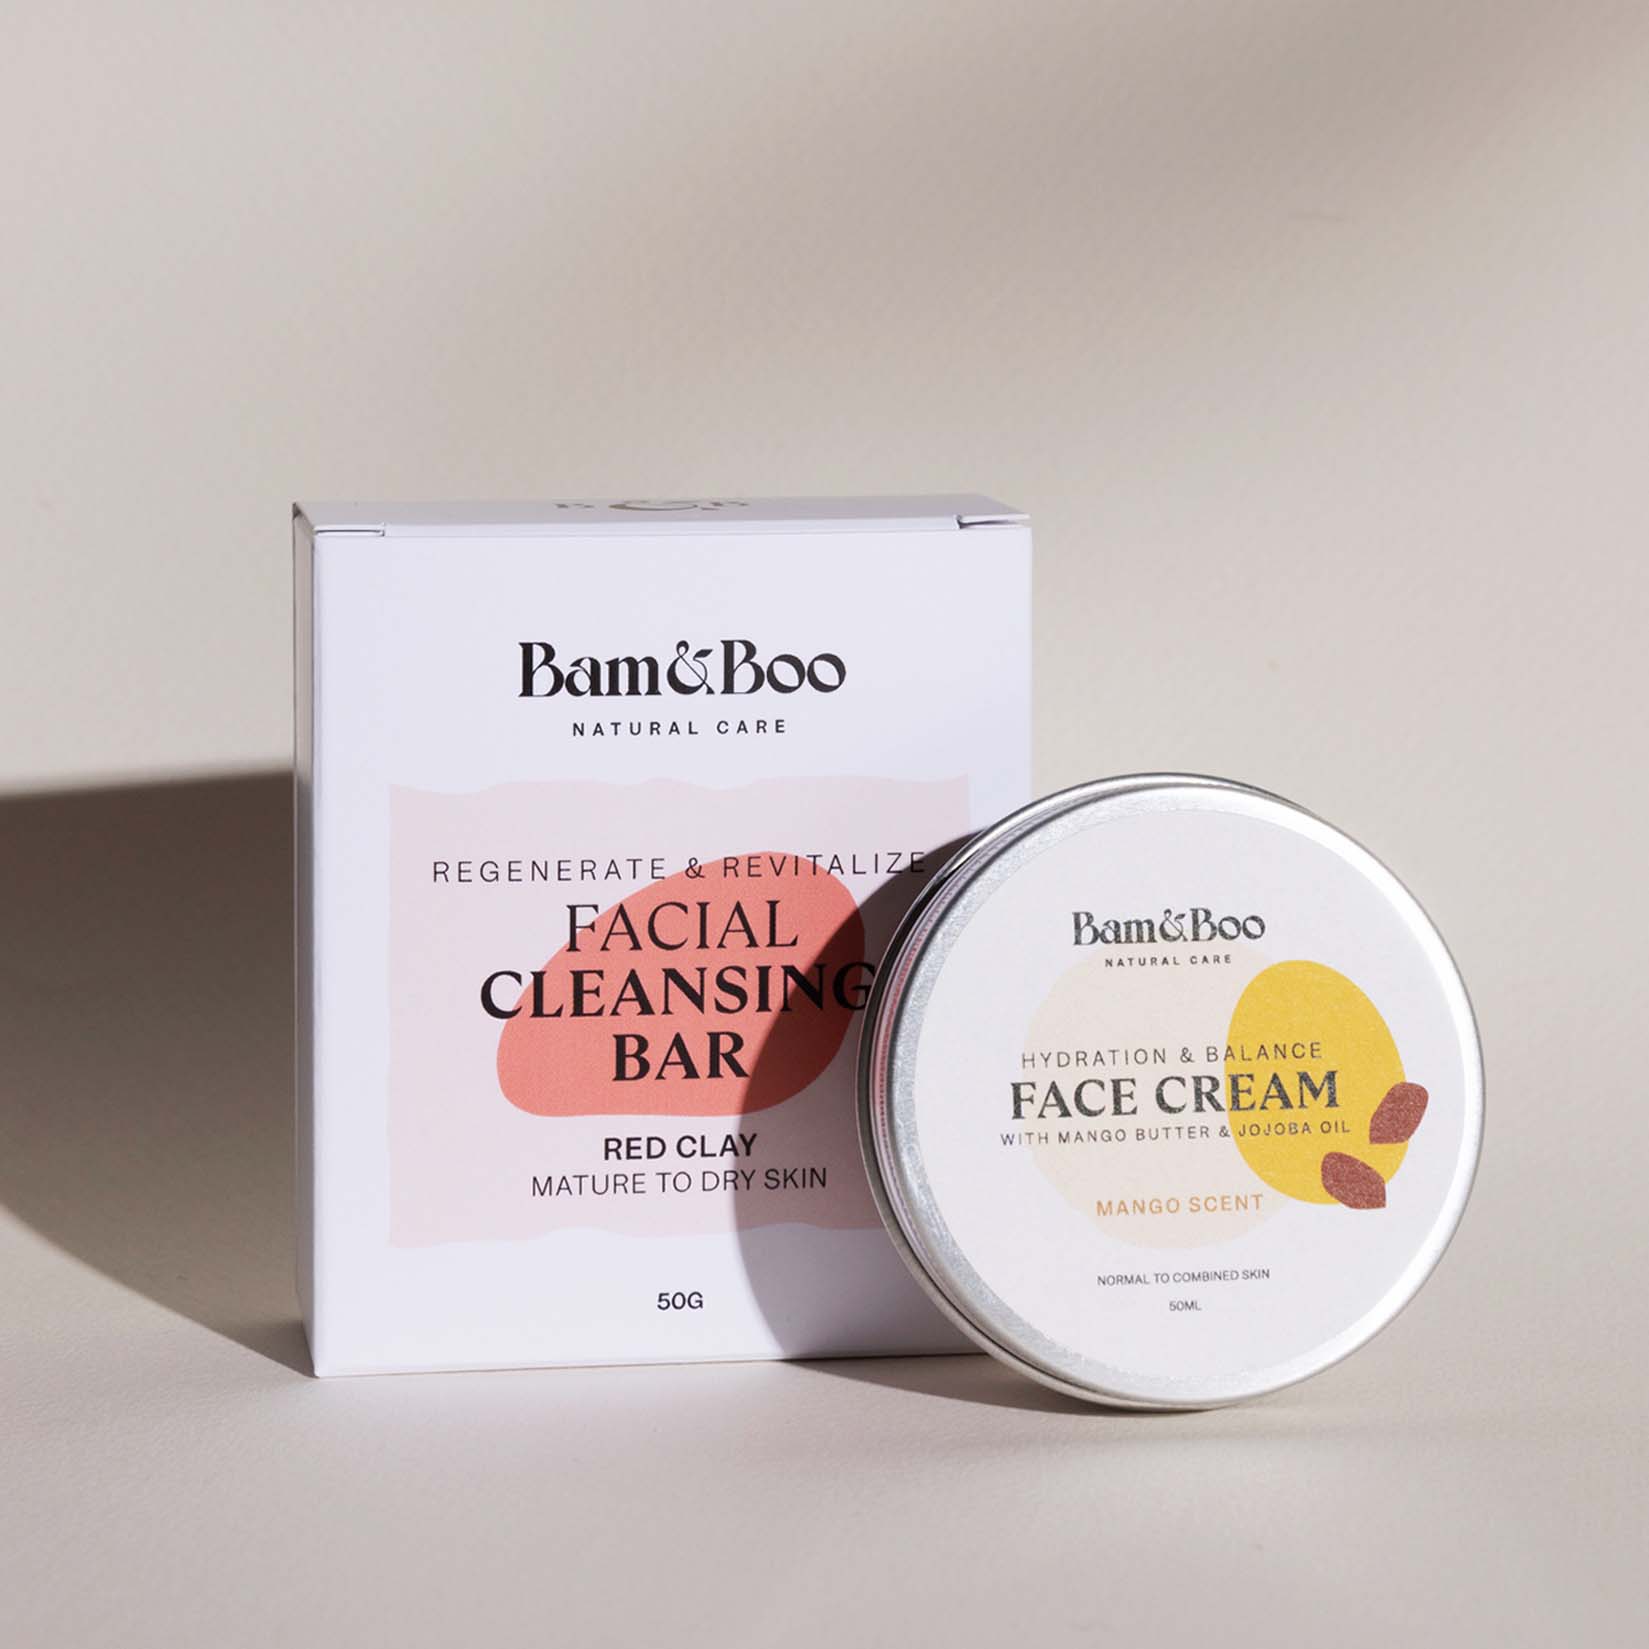 KIT | Beauty Fatale - Face Cream & Face Cleansing Bar - Bam&Boo - Eco-friendly, vegan, sustainable oral and personal care